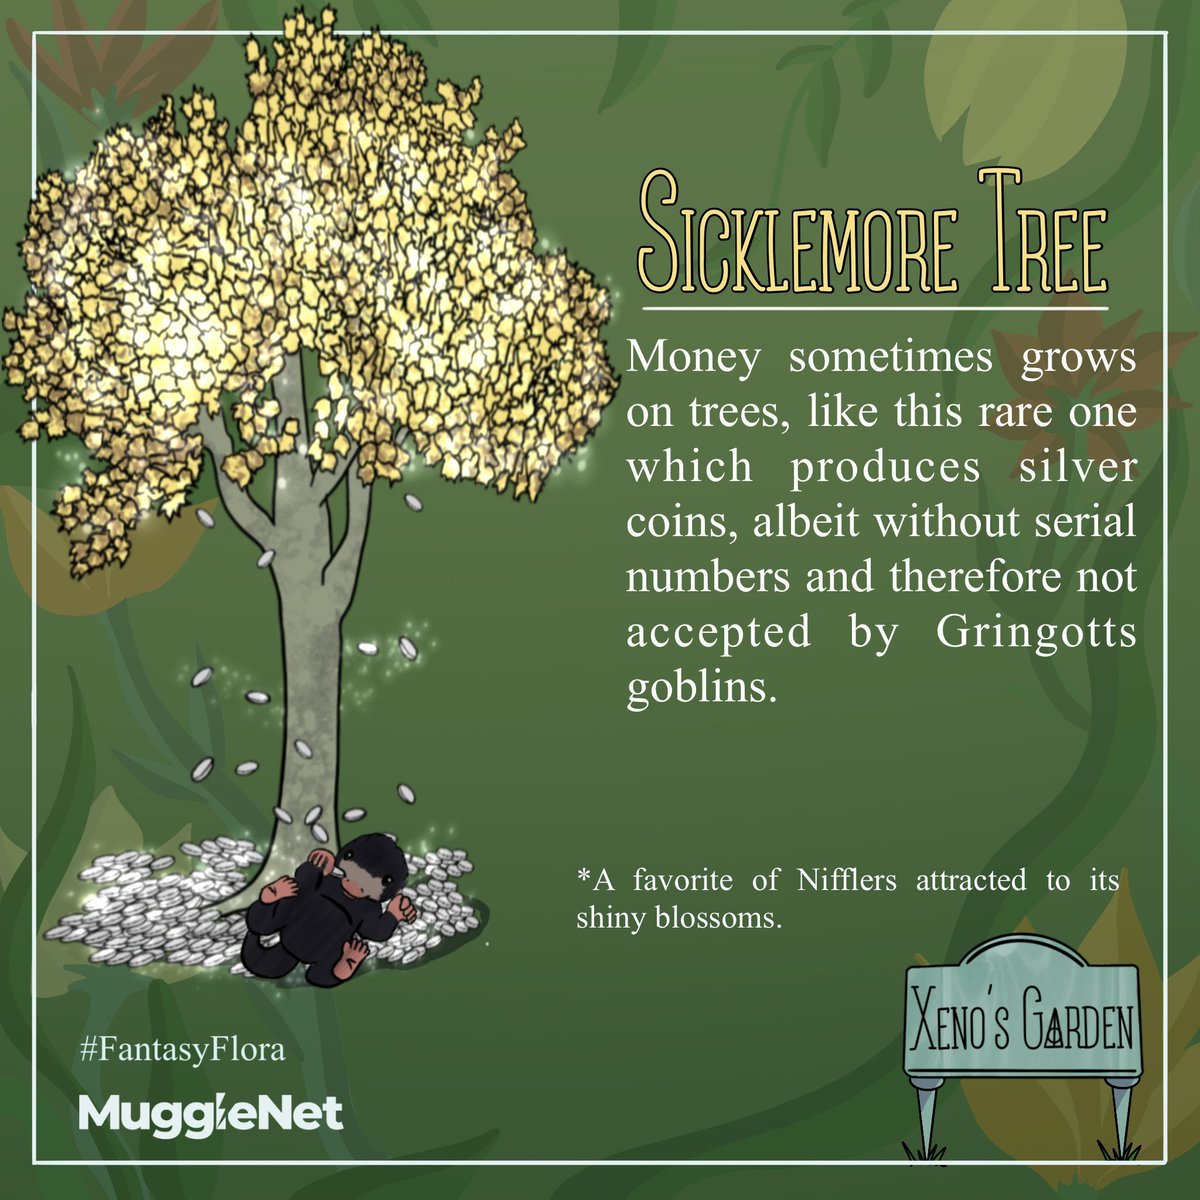 Today in 'Xeno's Garden,' we feature the 'Sicklemore Tree.' This unique tree boasts foliage made of shimmering silver 'Sickles,' making it a valuable addition to any landscape. Unfortunately, the coins do not have serial numbers, making them useless as legal tender. #FantasyFlora